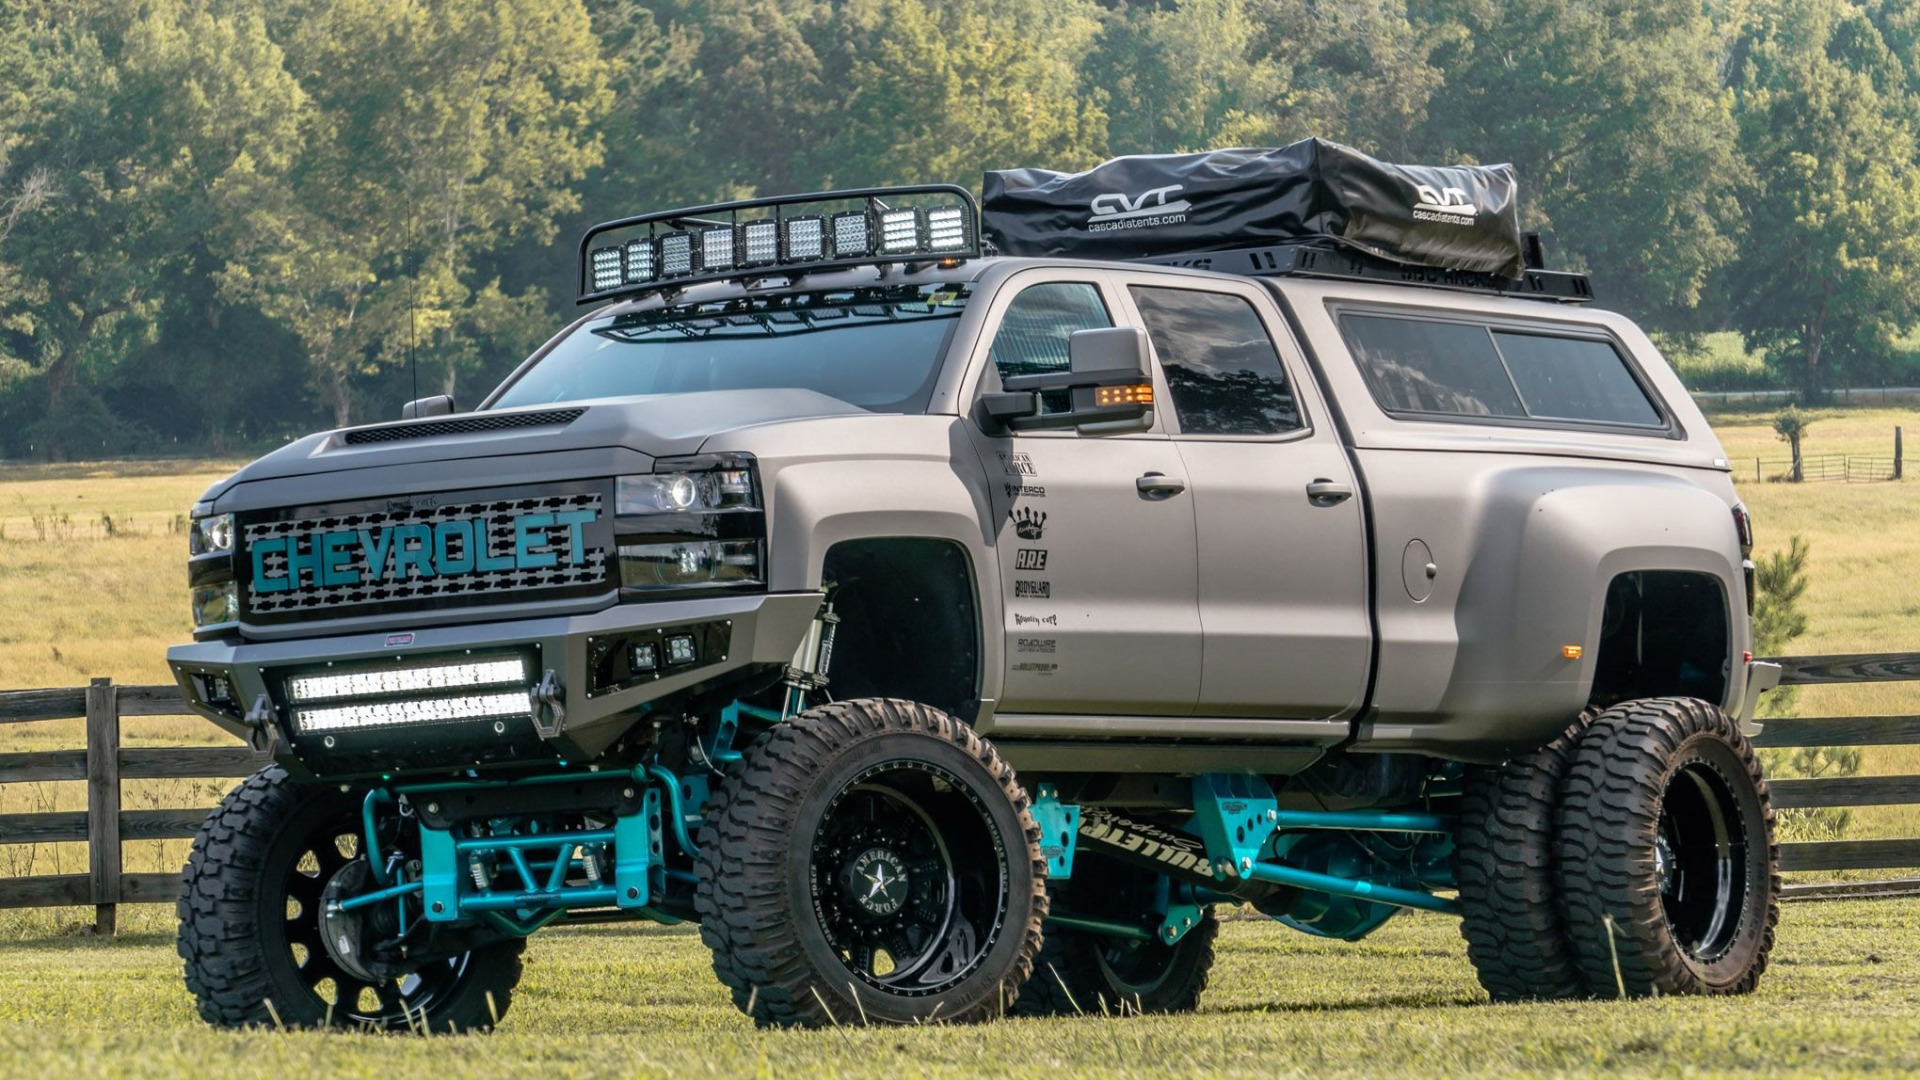 lamtac explore inside the dinosaur chevrolet off road with the giant s power of more than horsepower 650976c2ee371 Explore Insιde The "dinosaur" CҺevroleT Off Road With The Giant's Power Of More Than 759 Horsepower